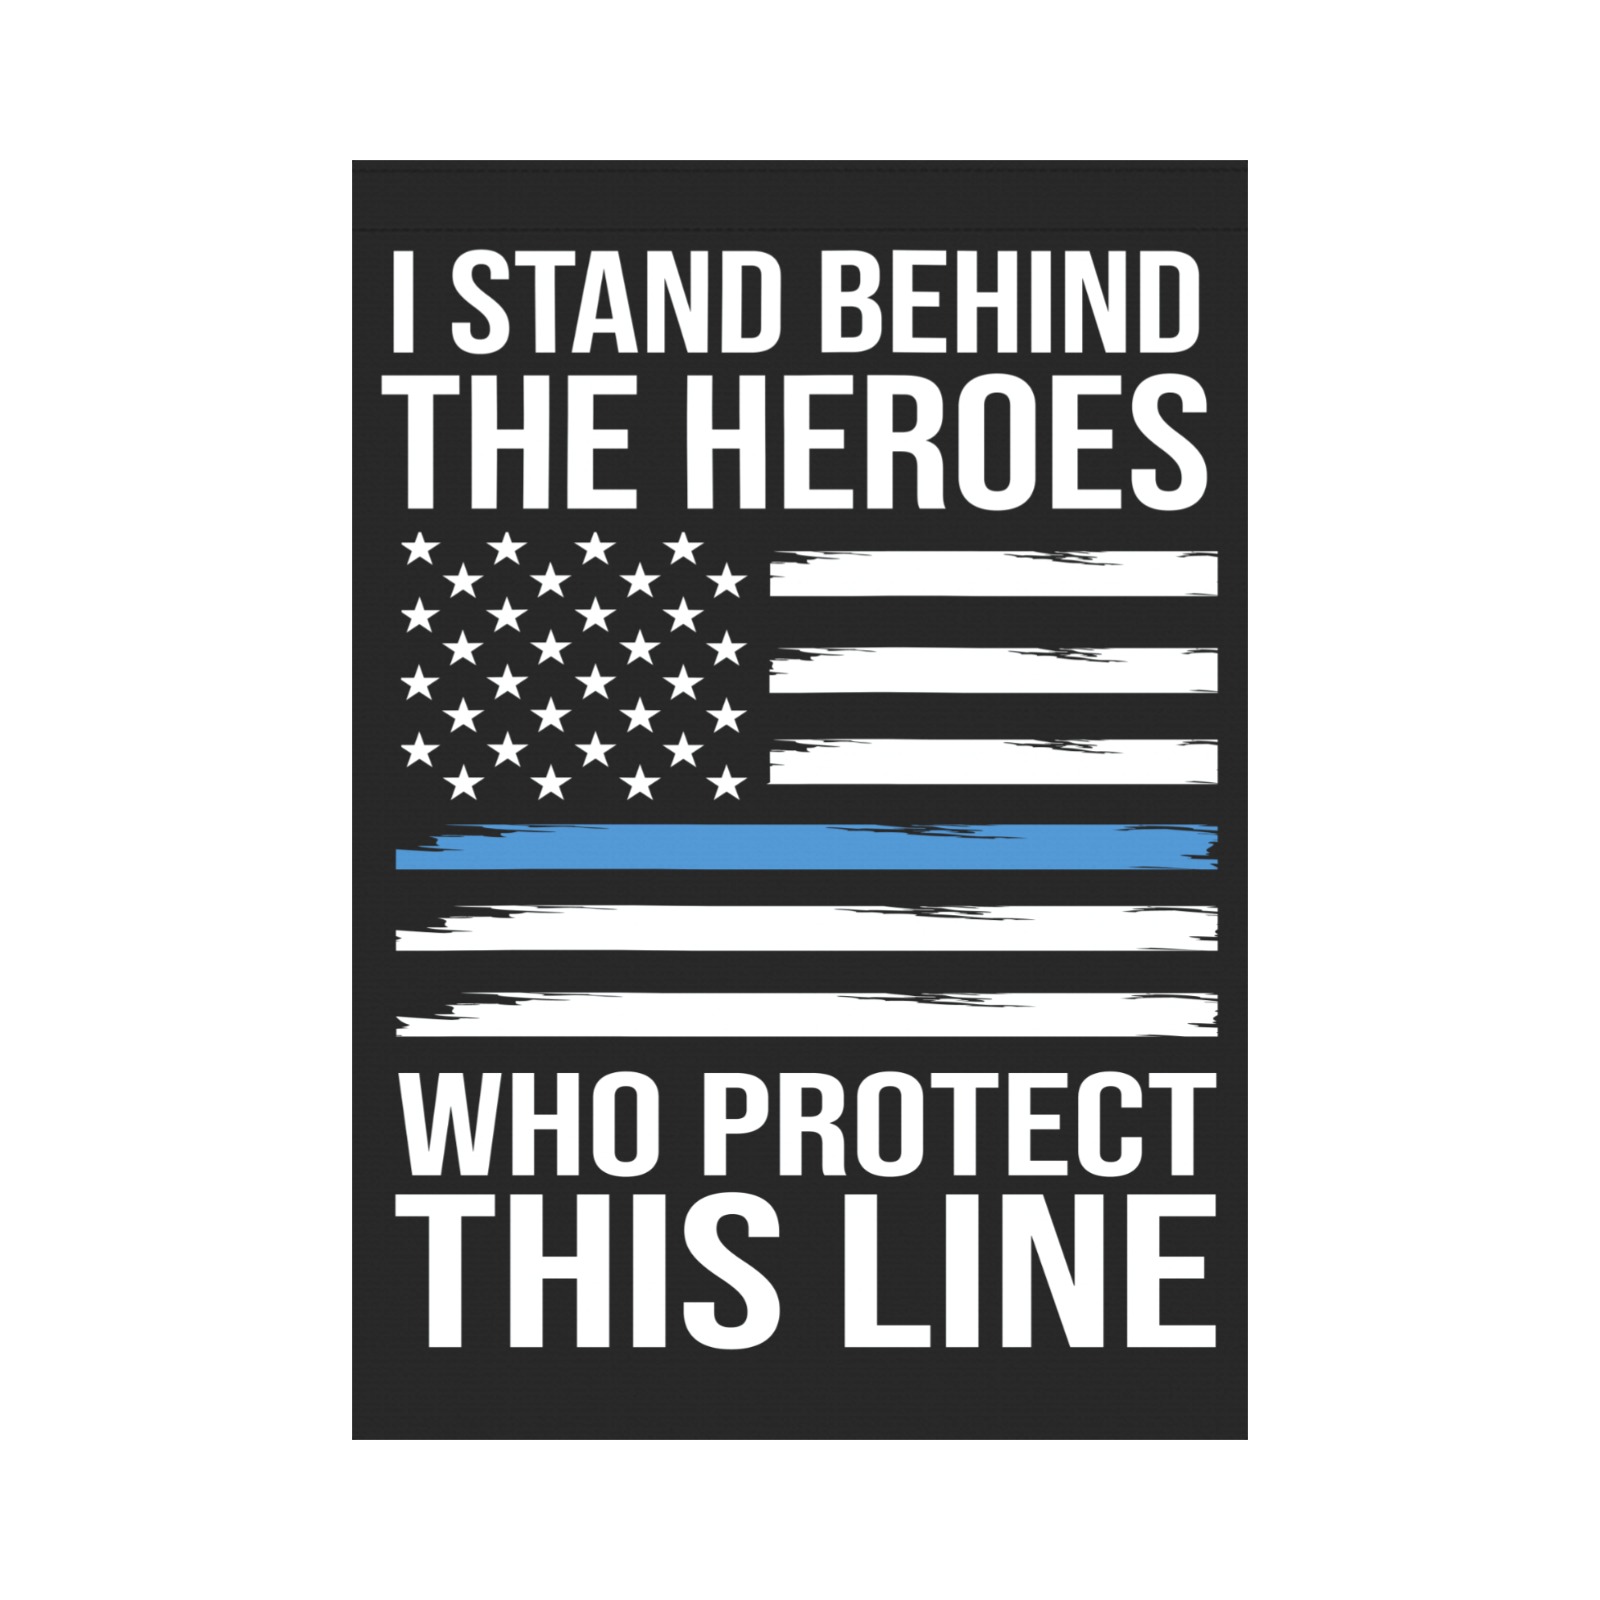 I Stand Behind The Blue Heroes Garden Flag 28''x40'' （Without Flagpole）